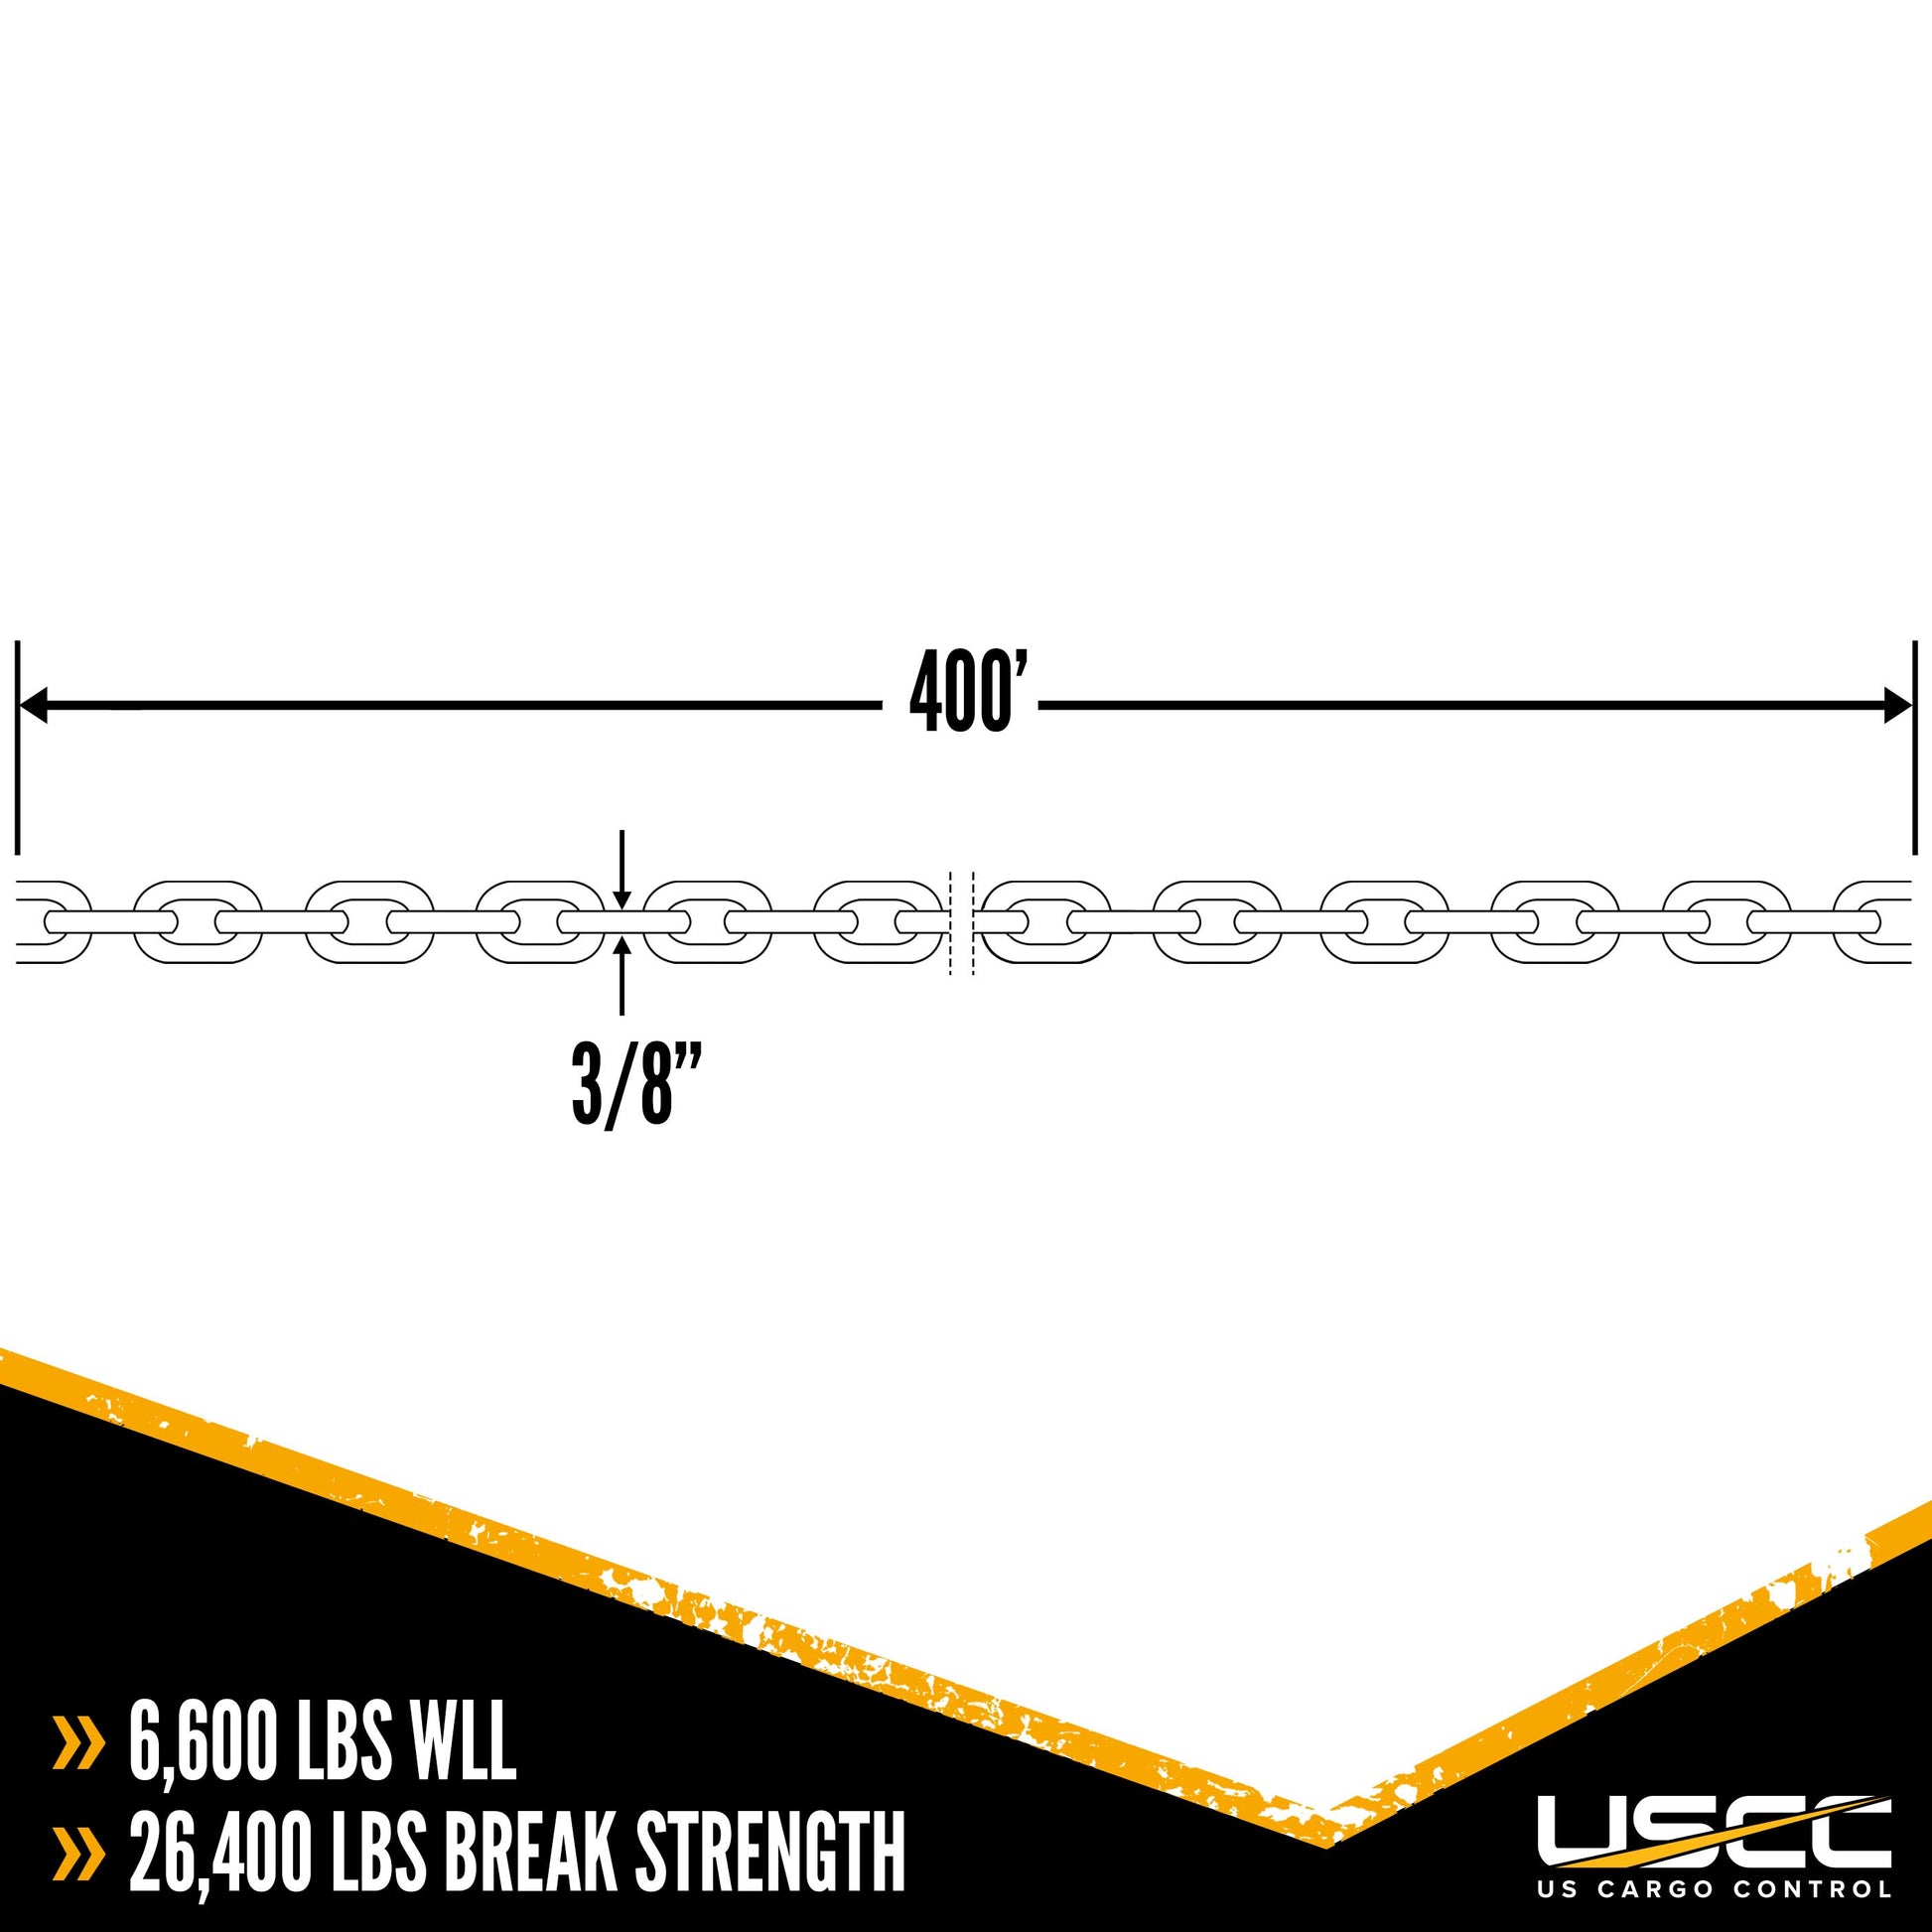 38 inch x 400 foot CM Transport Chain Drum Grade 70 image 4 of 7